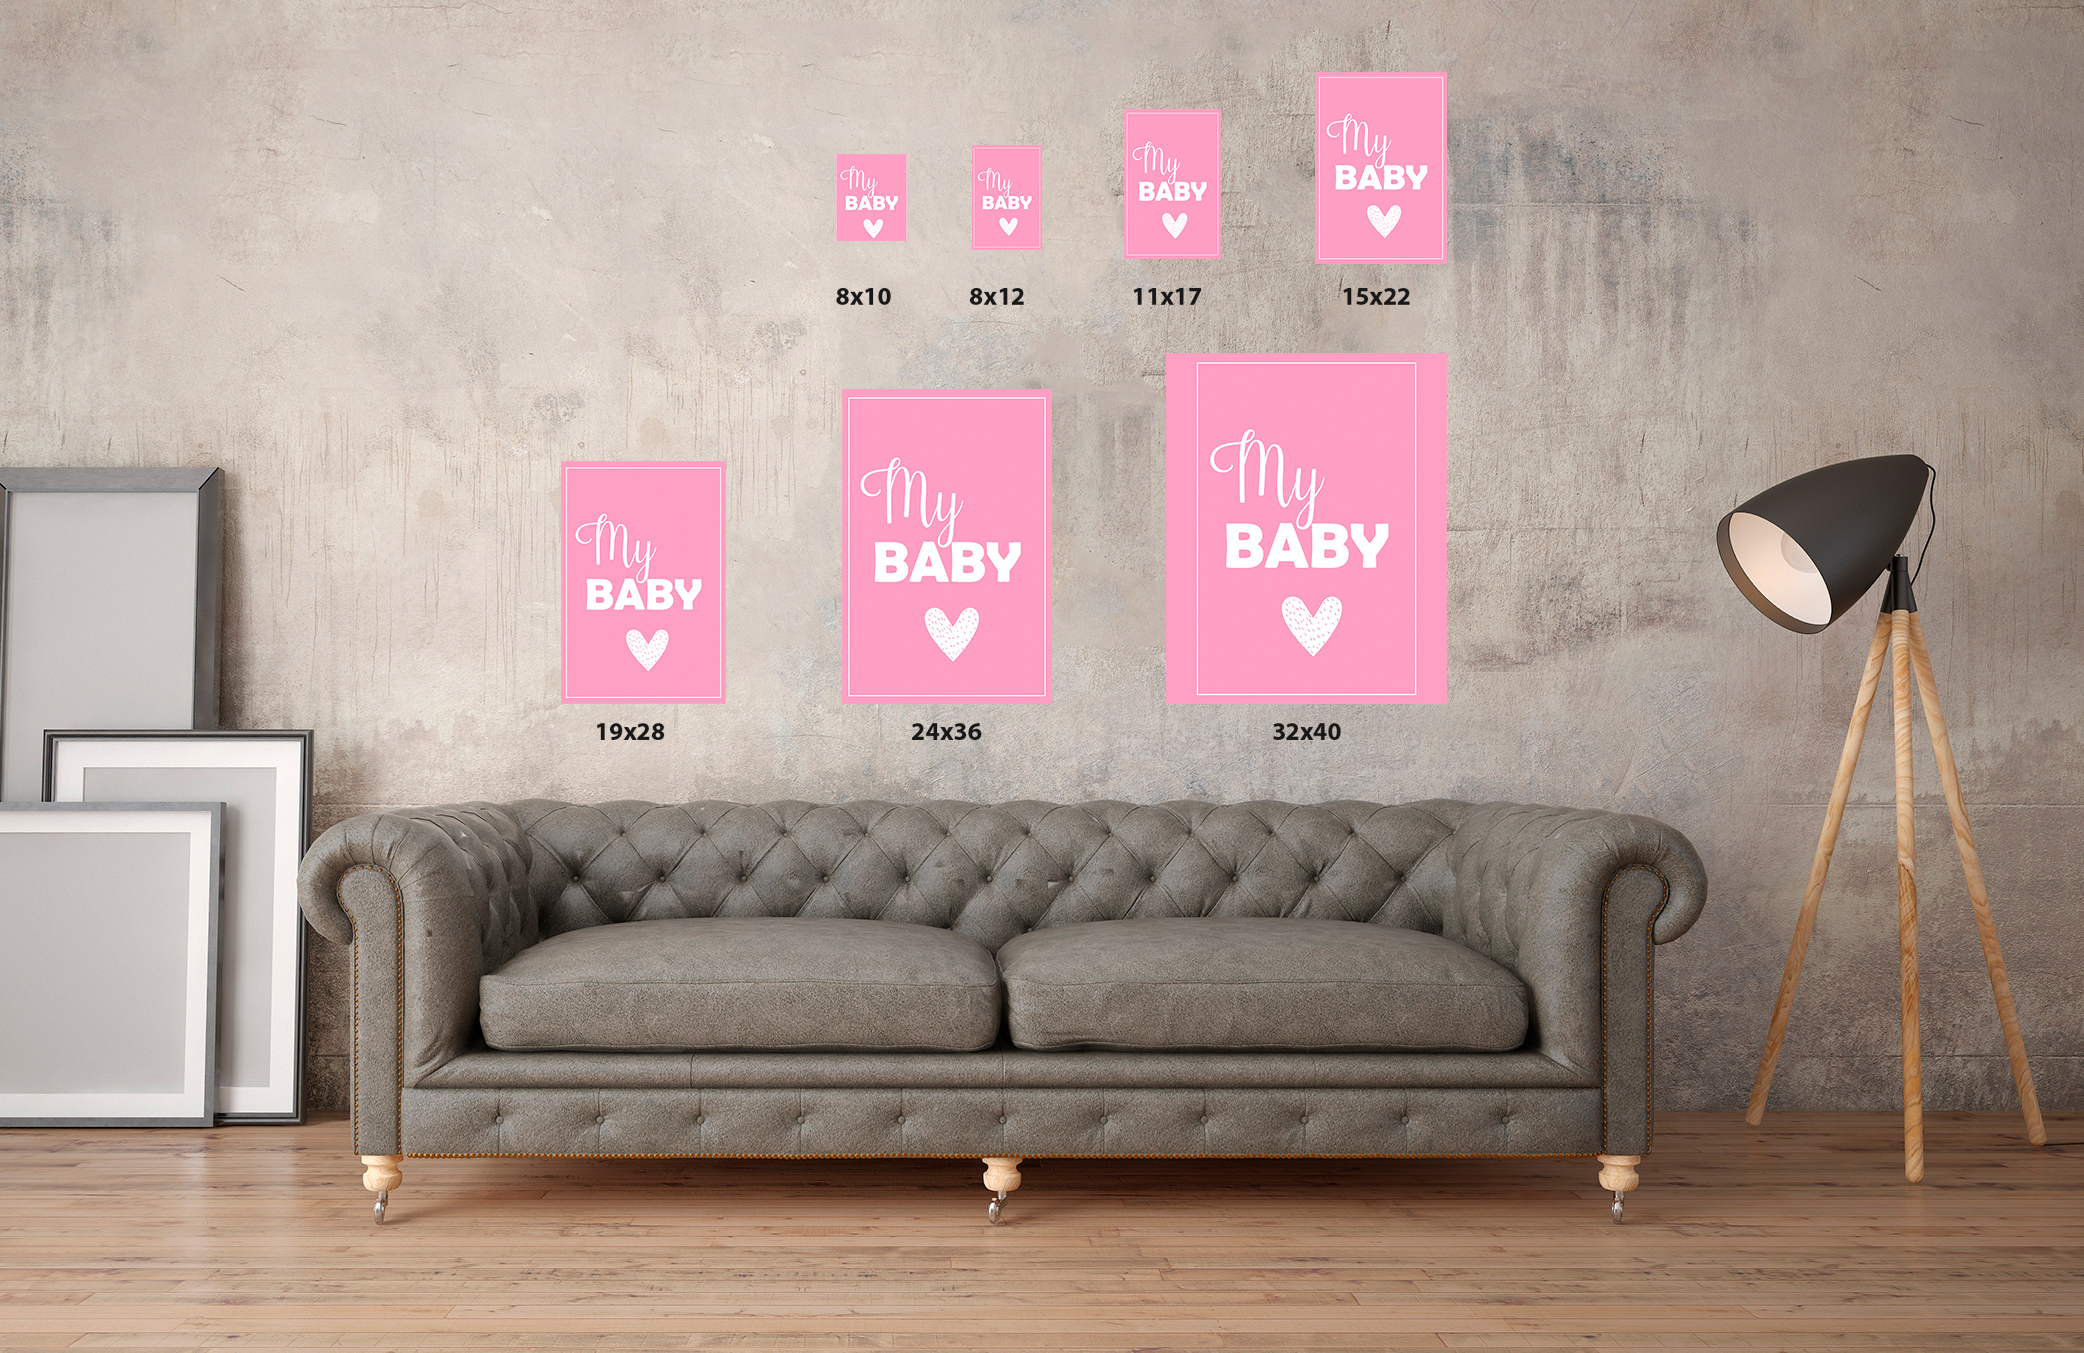 Awkward Styles My Baby Poster Wall Art Kids Room Wall Decor Pink Poster Baby Room Decor Gifts for Kids Baby Girl Room Printed Art Picture Mother Quotes Decor Girls Play Room Wall Decor Pink Poster - image 3 of 3